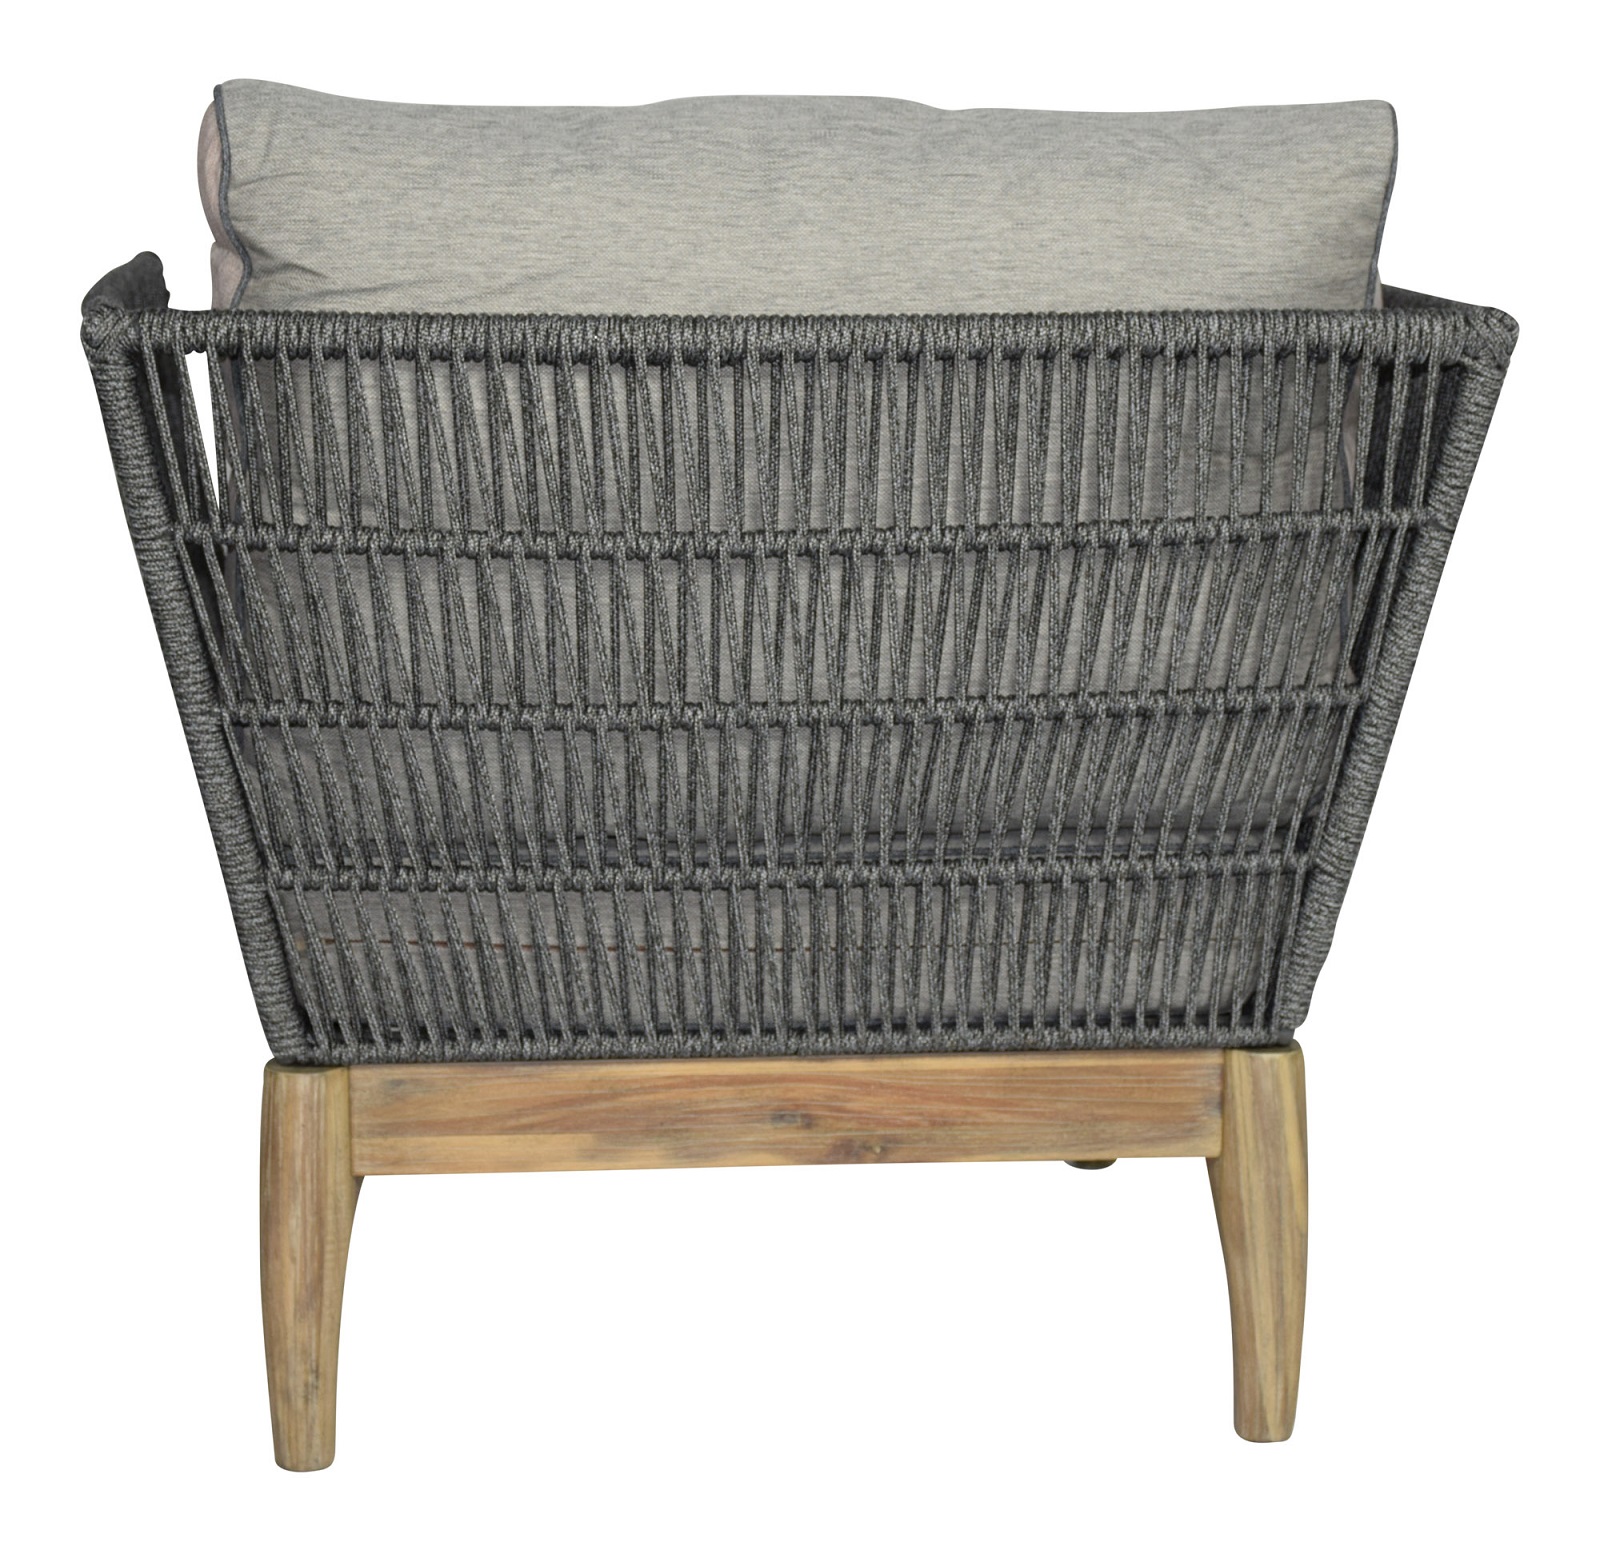 Garden furniture set Puerto Rico in grey with rope winding